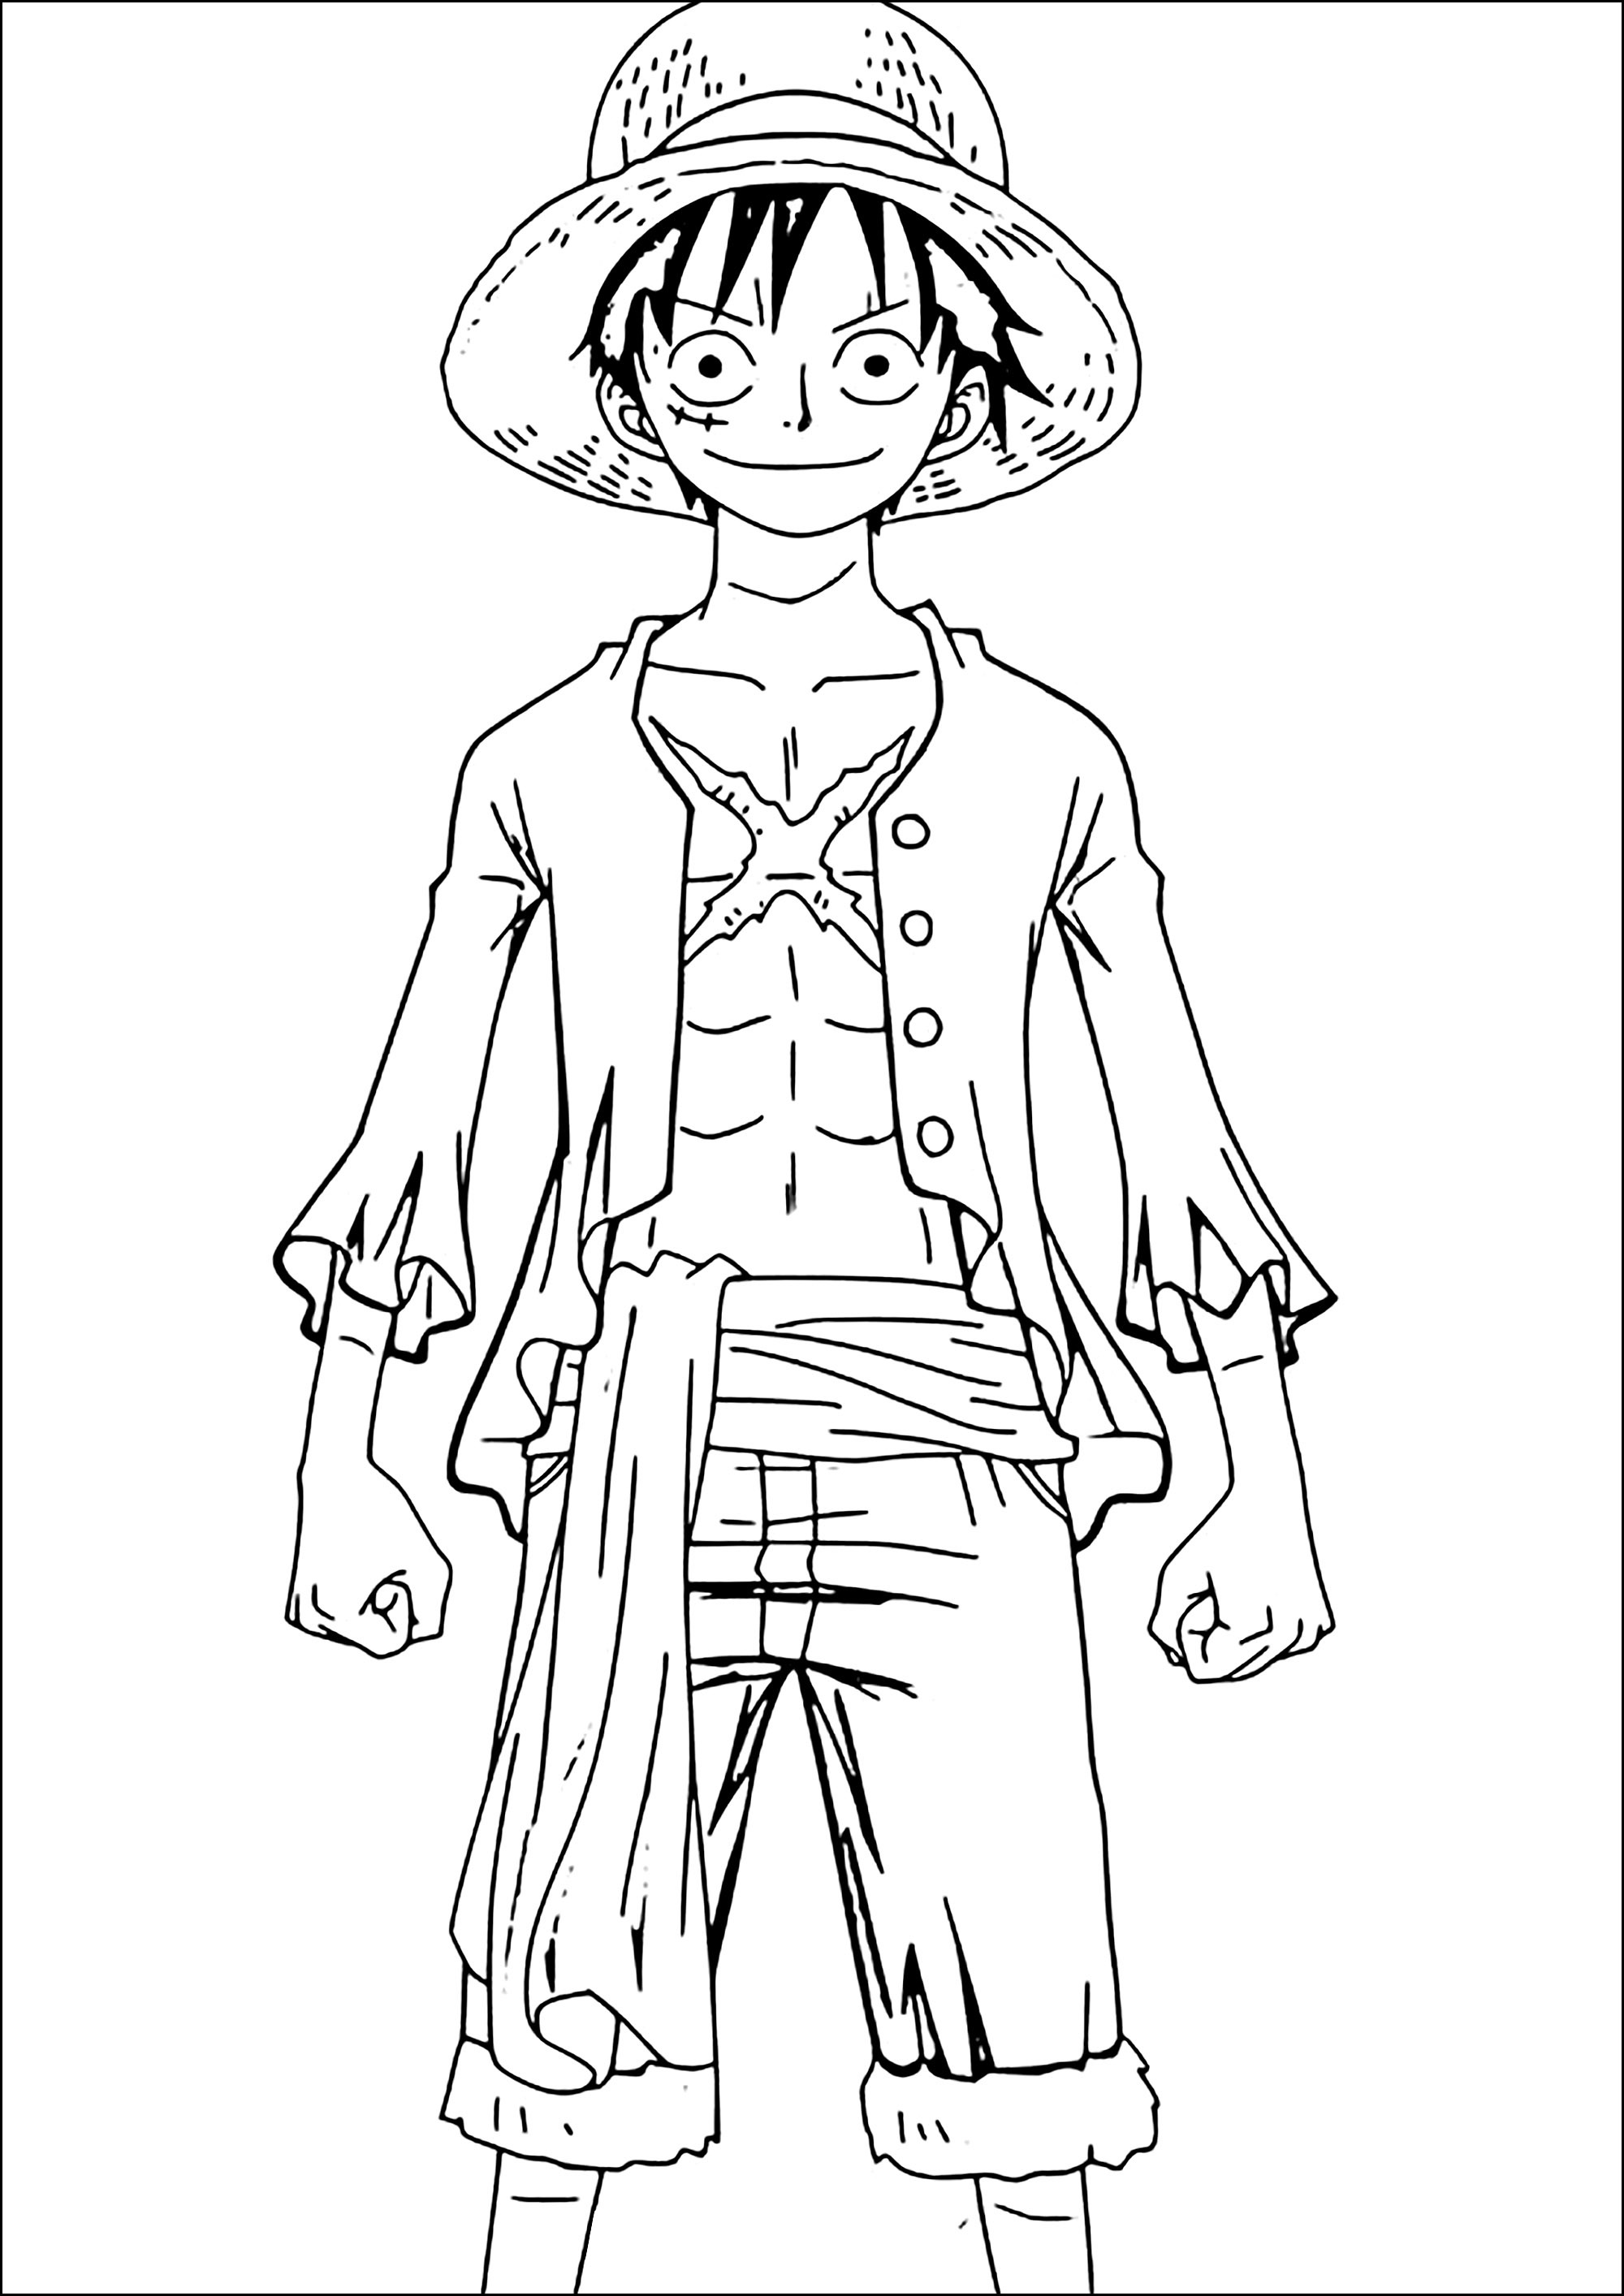 Monkey D. Luffy coloring page. The One Piece hero to color